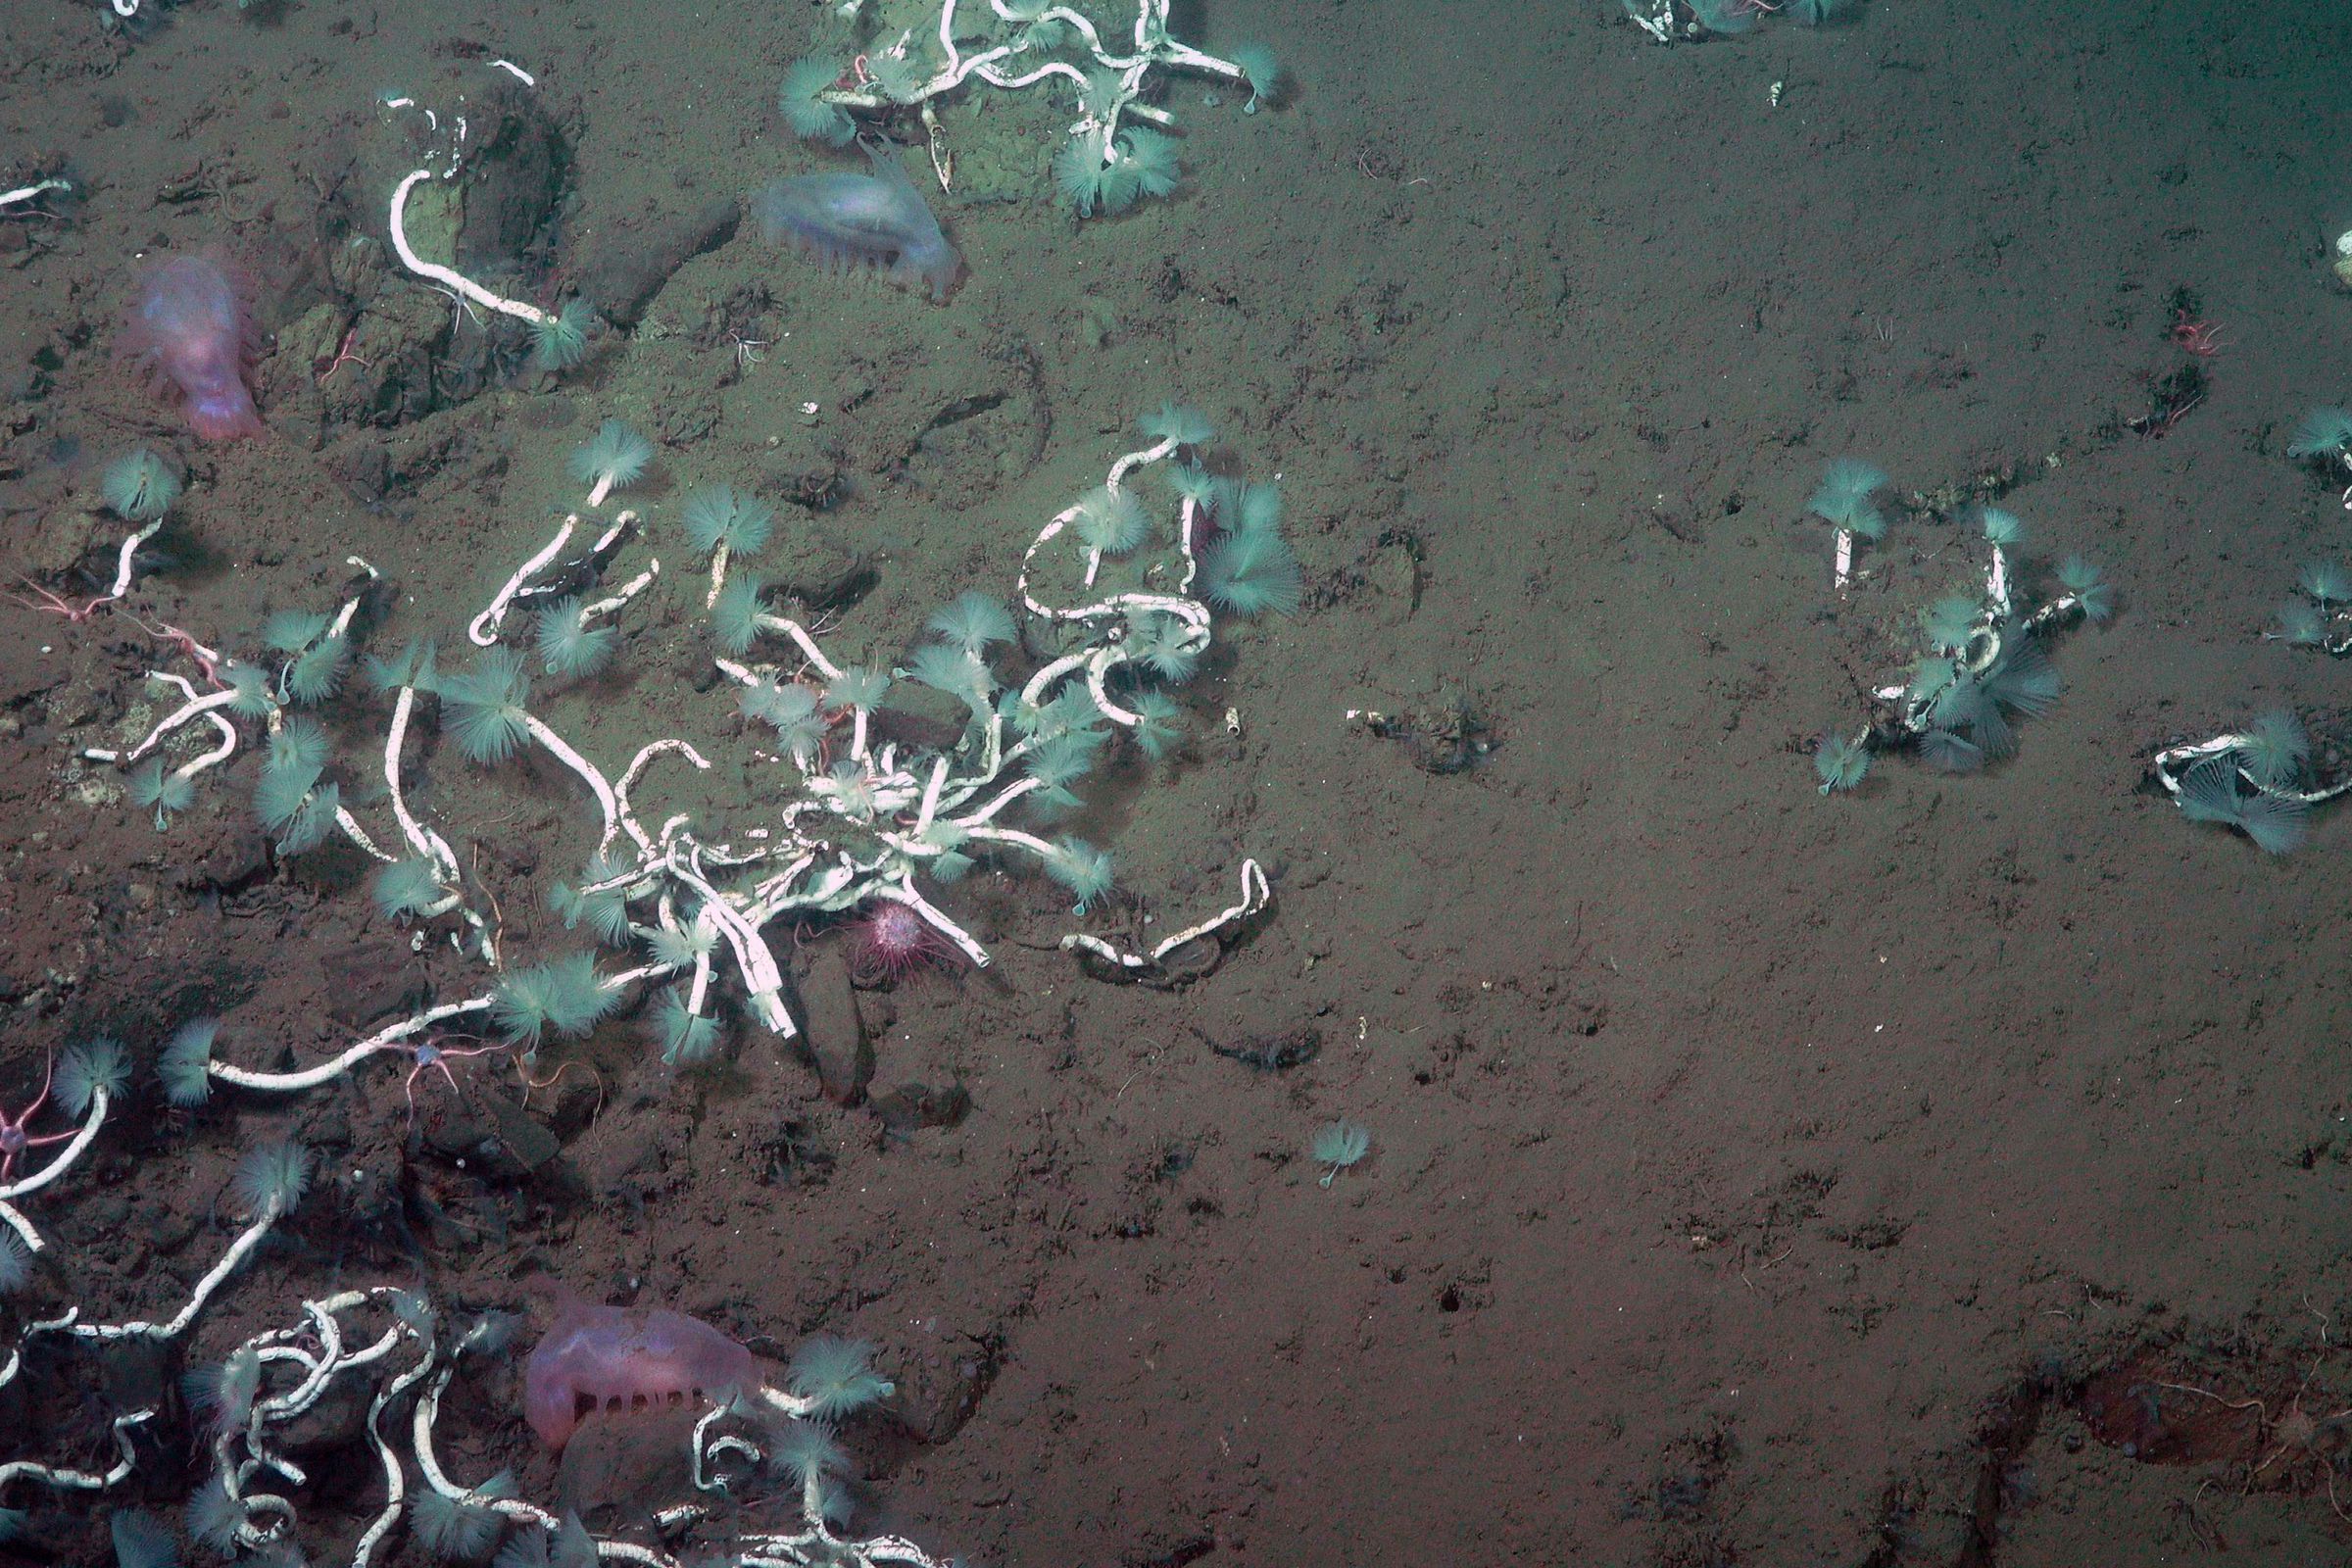 Methane-consuming serpulid worms on the seafloor off the coast of Costa Rica.